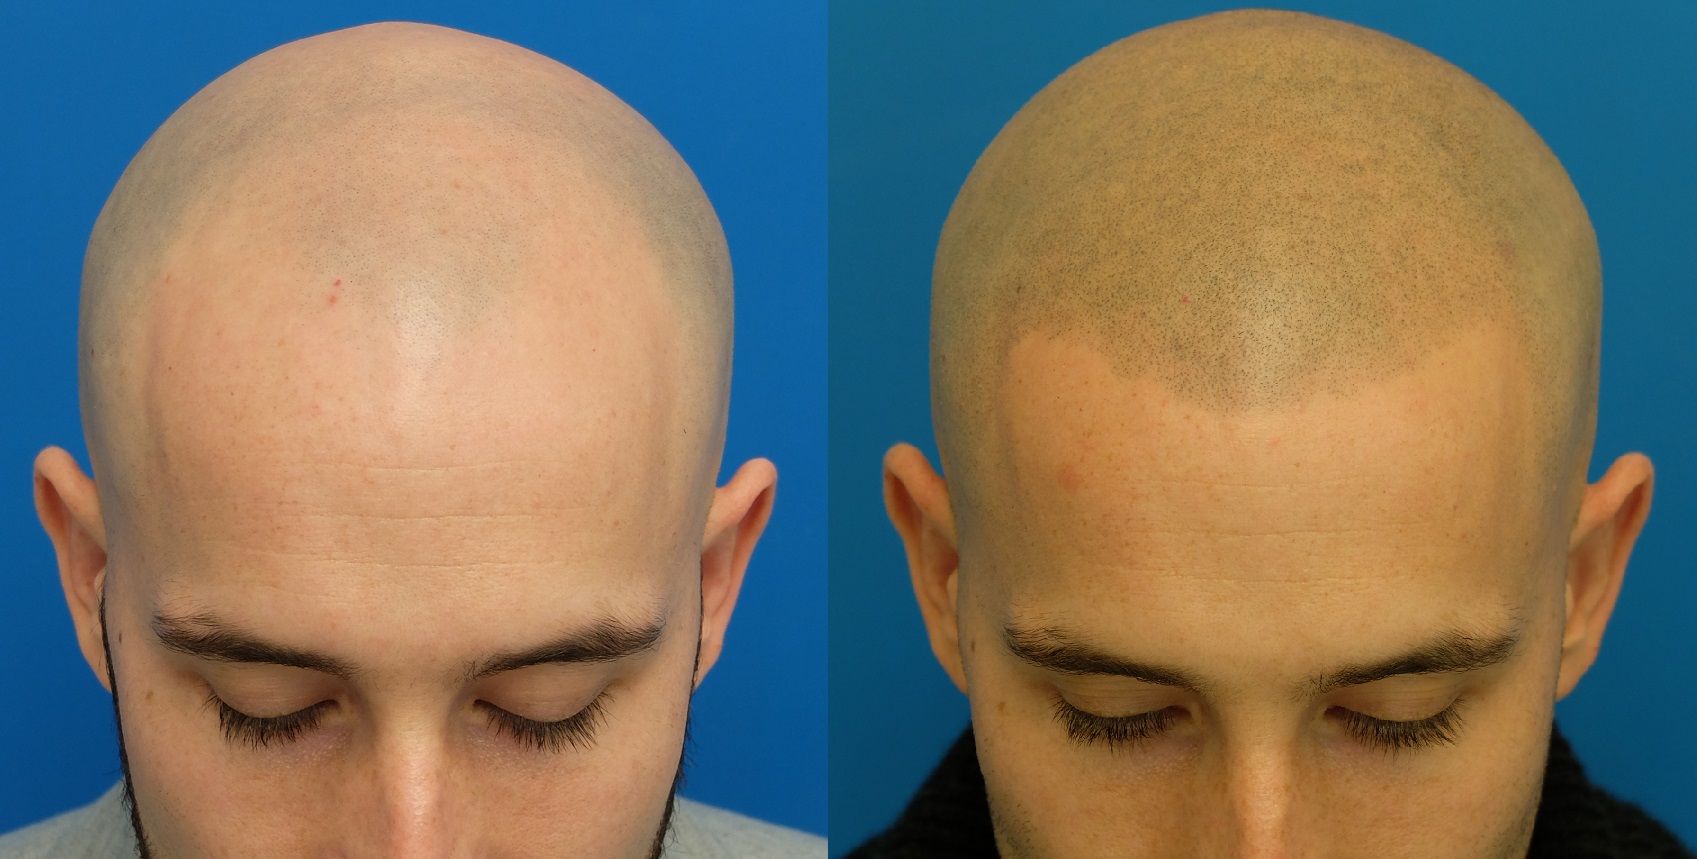 Shaved head before and after engine